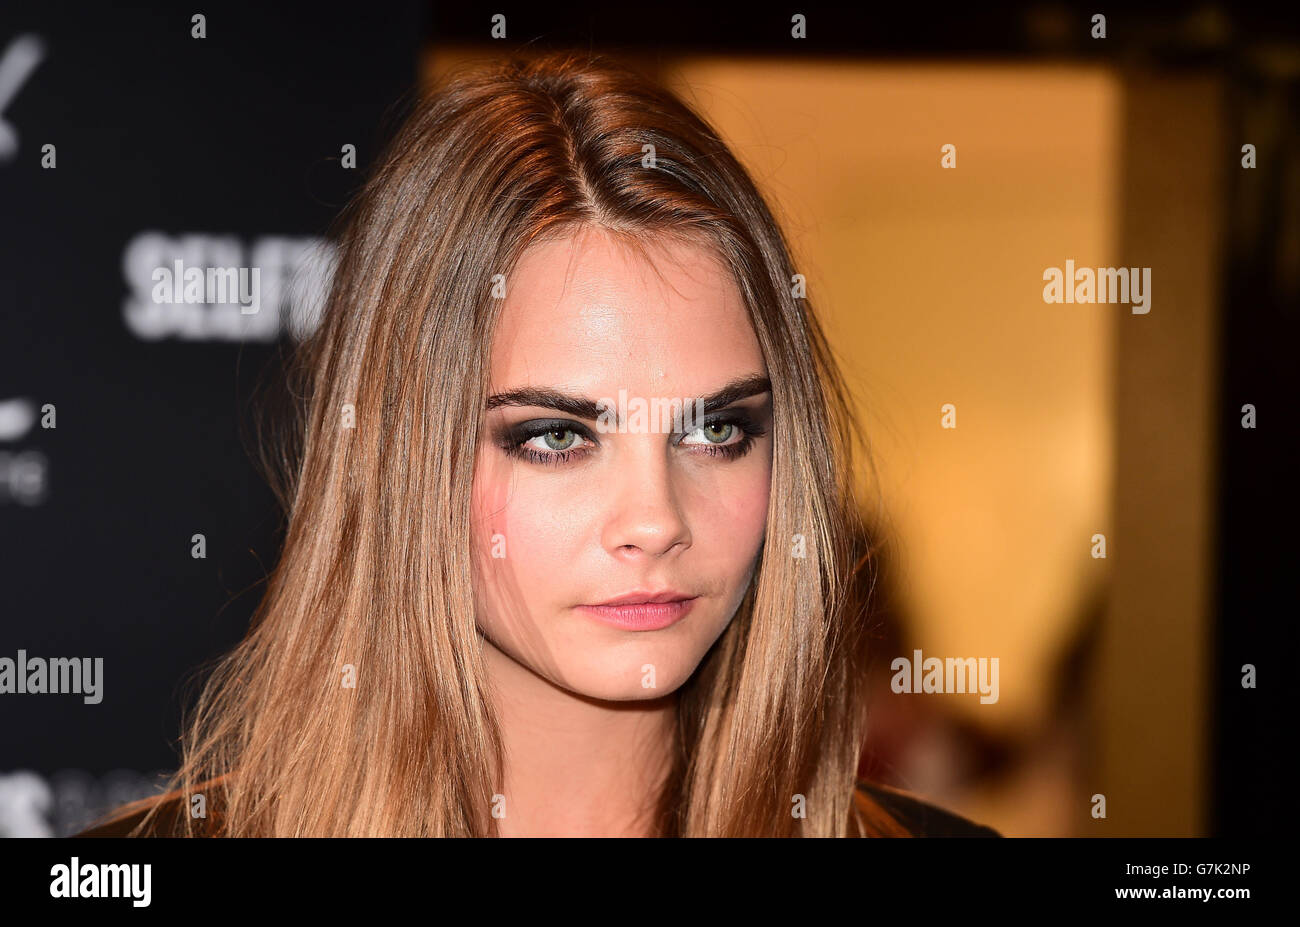 Cara Delevingne, the face of YSL make up, celebrates the 15th anniversary of Yves Saint Laurent Beaute Luxurious Mascara, at London Stock Photo - Alamy